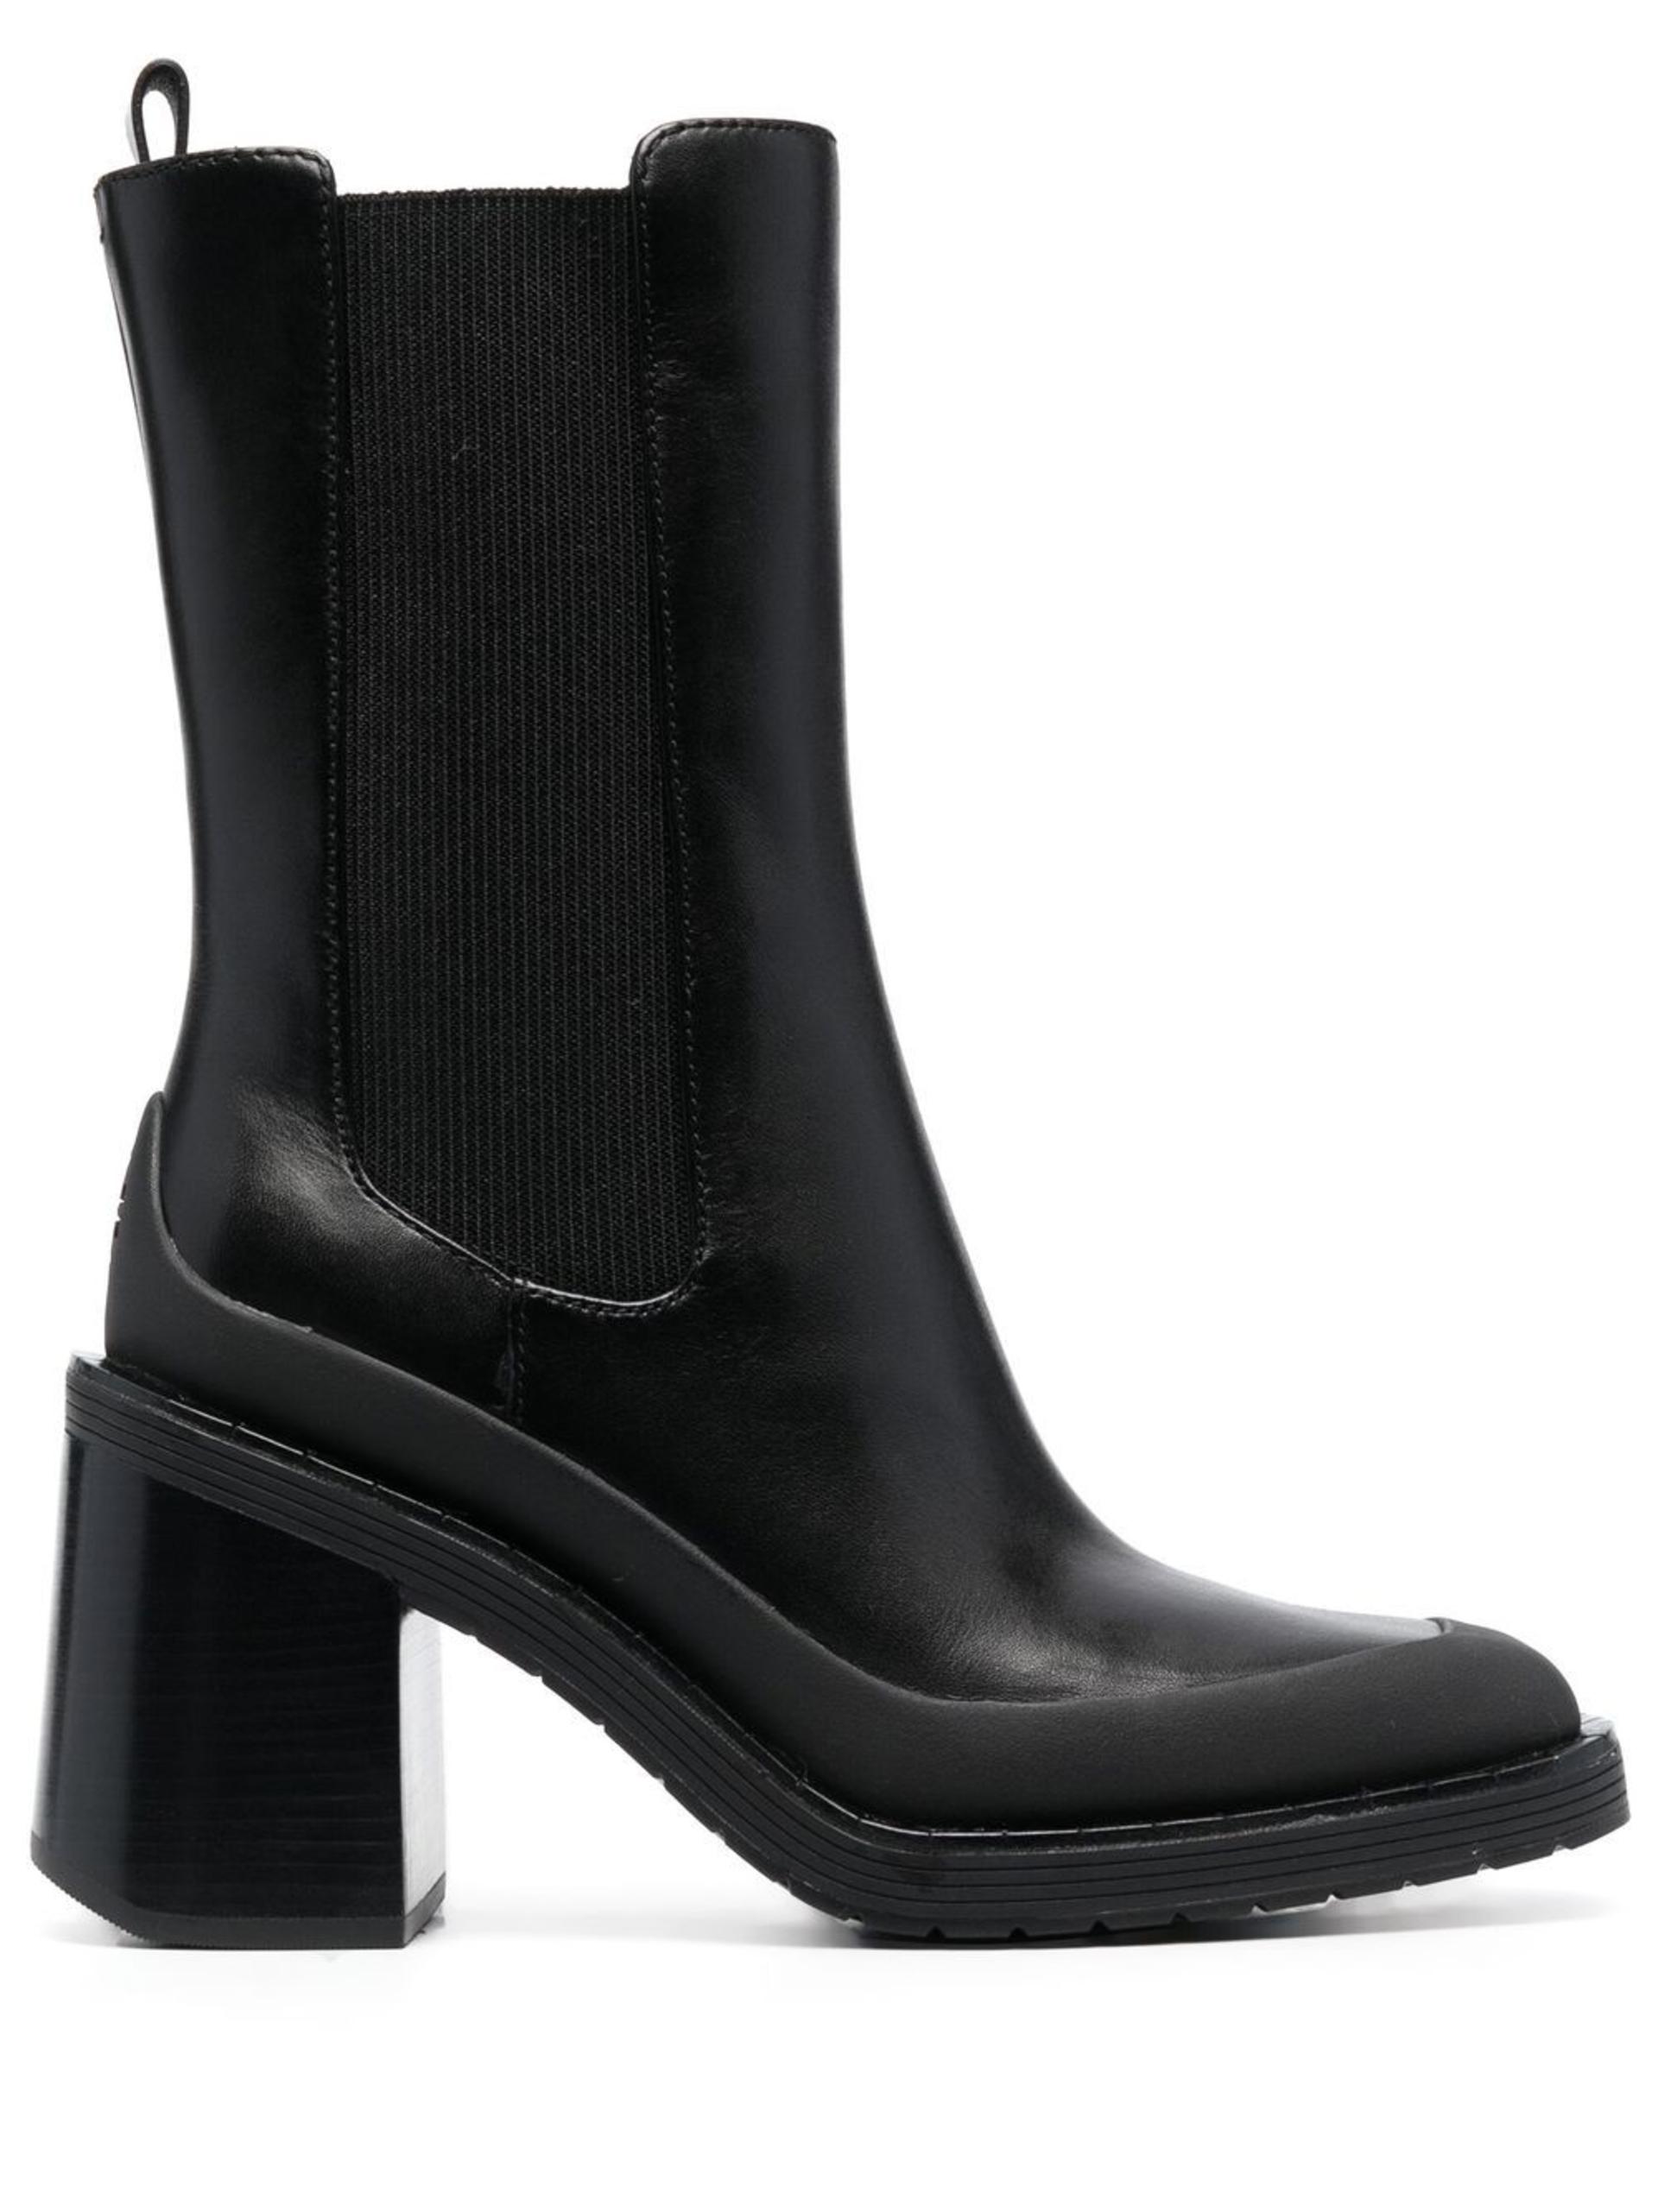 Tory Burch Expedition Chelsea Leather Boots in Black | Lyst